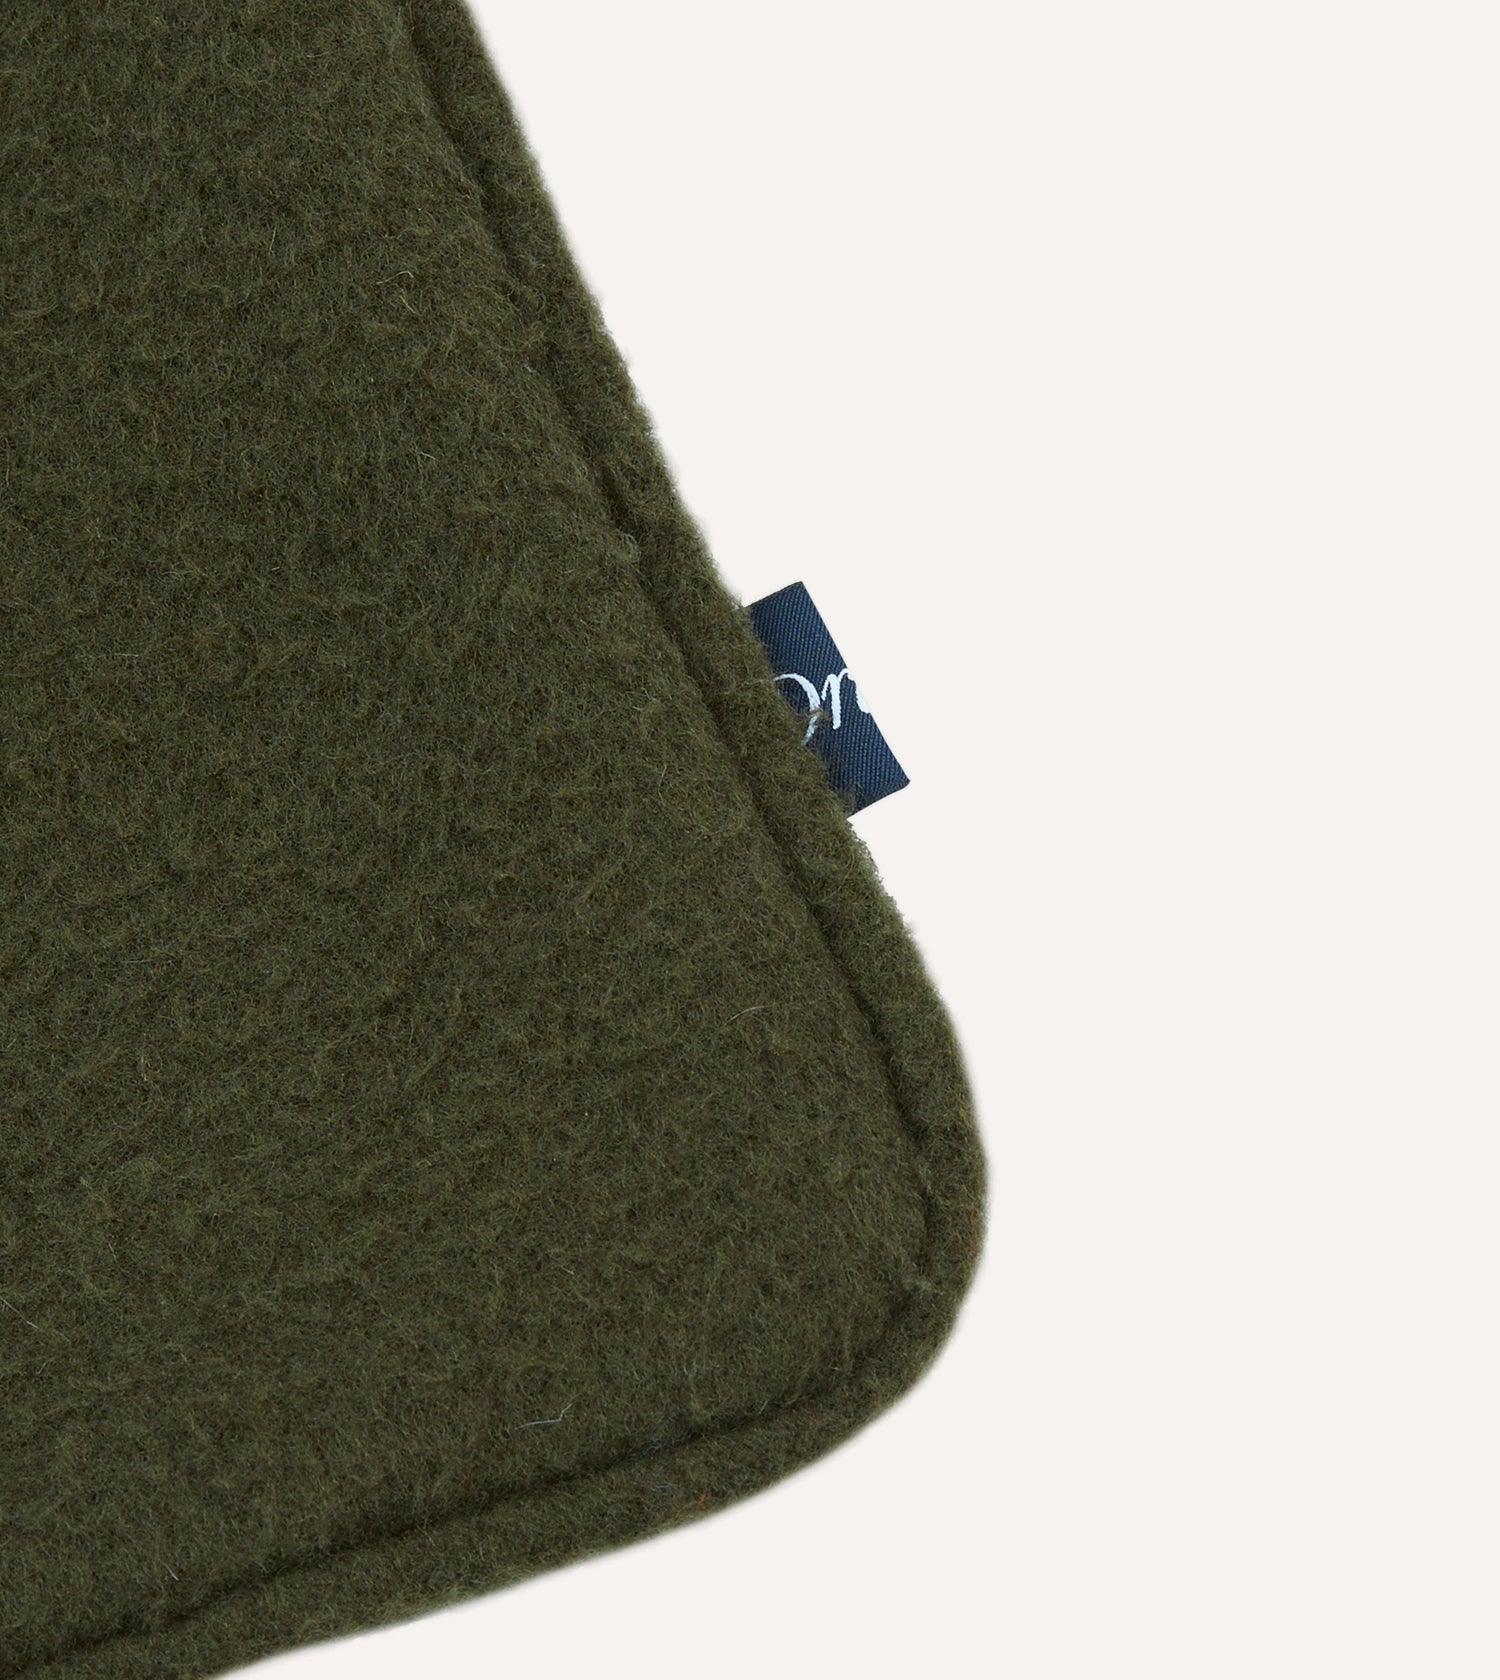 Olive Casentino Wool Cushion Cover